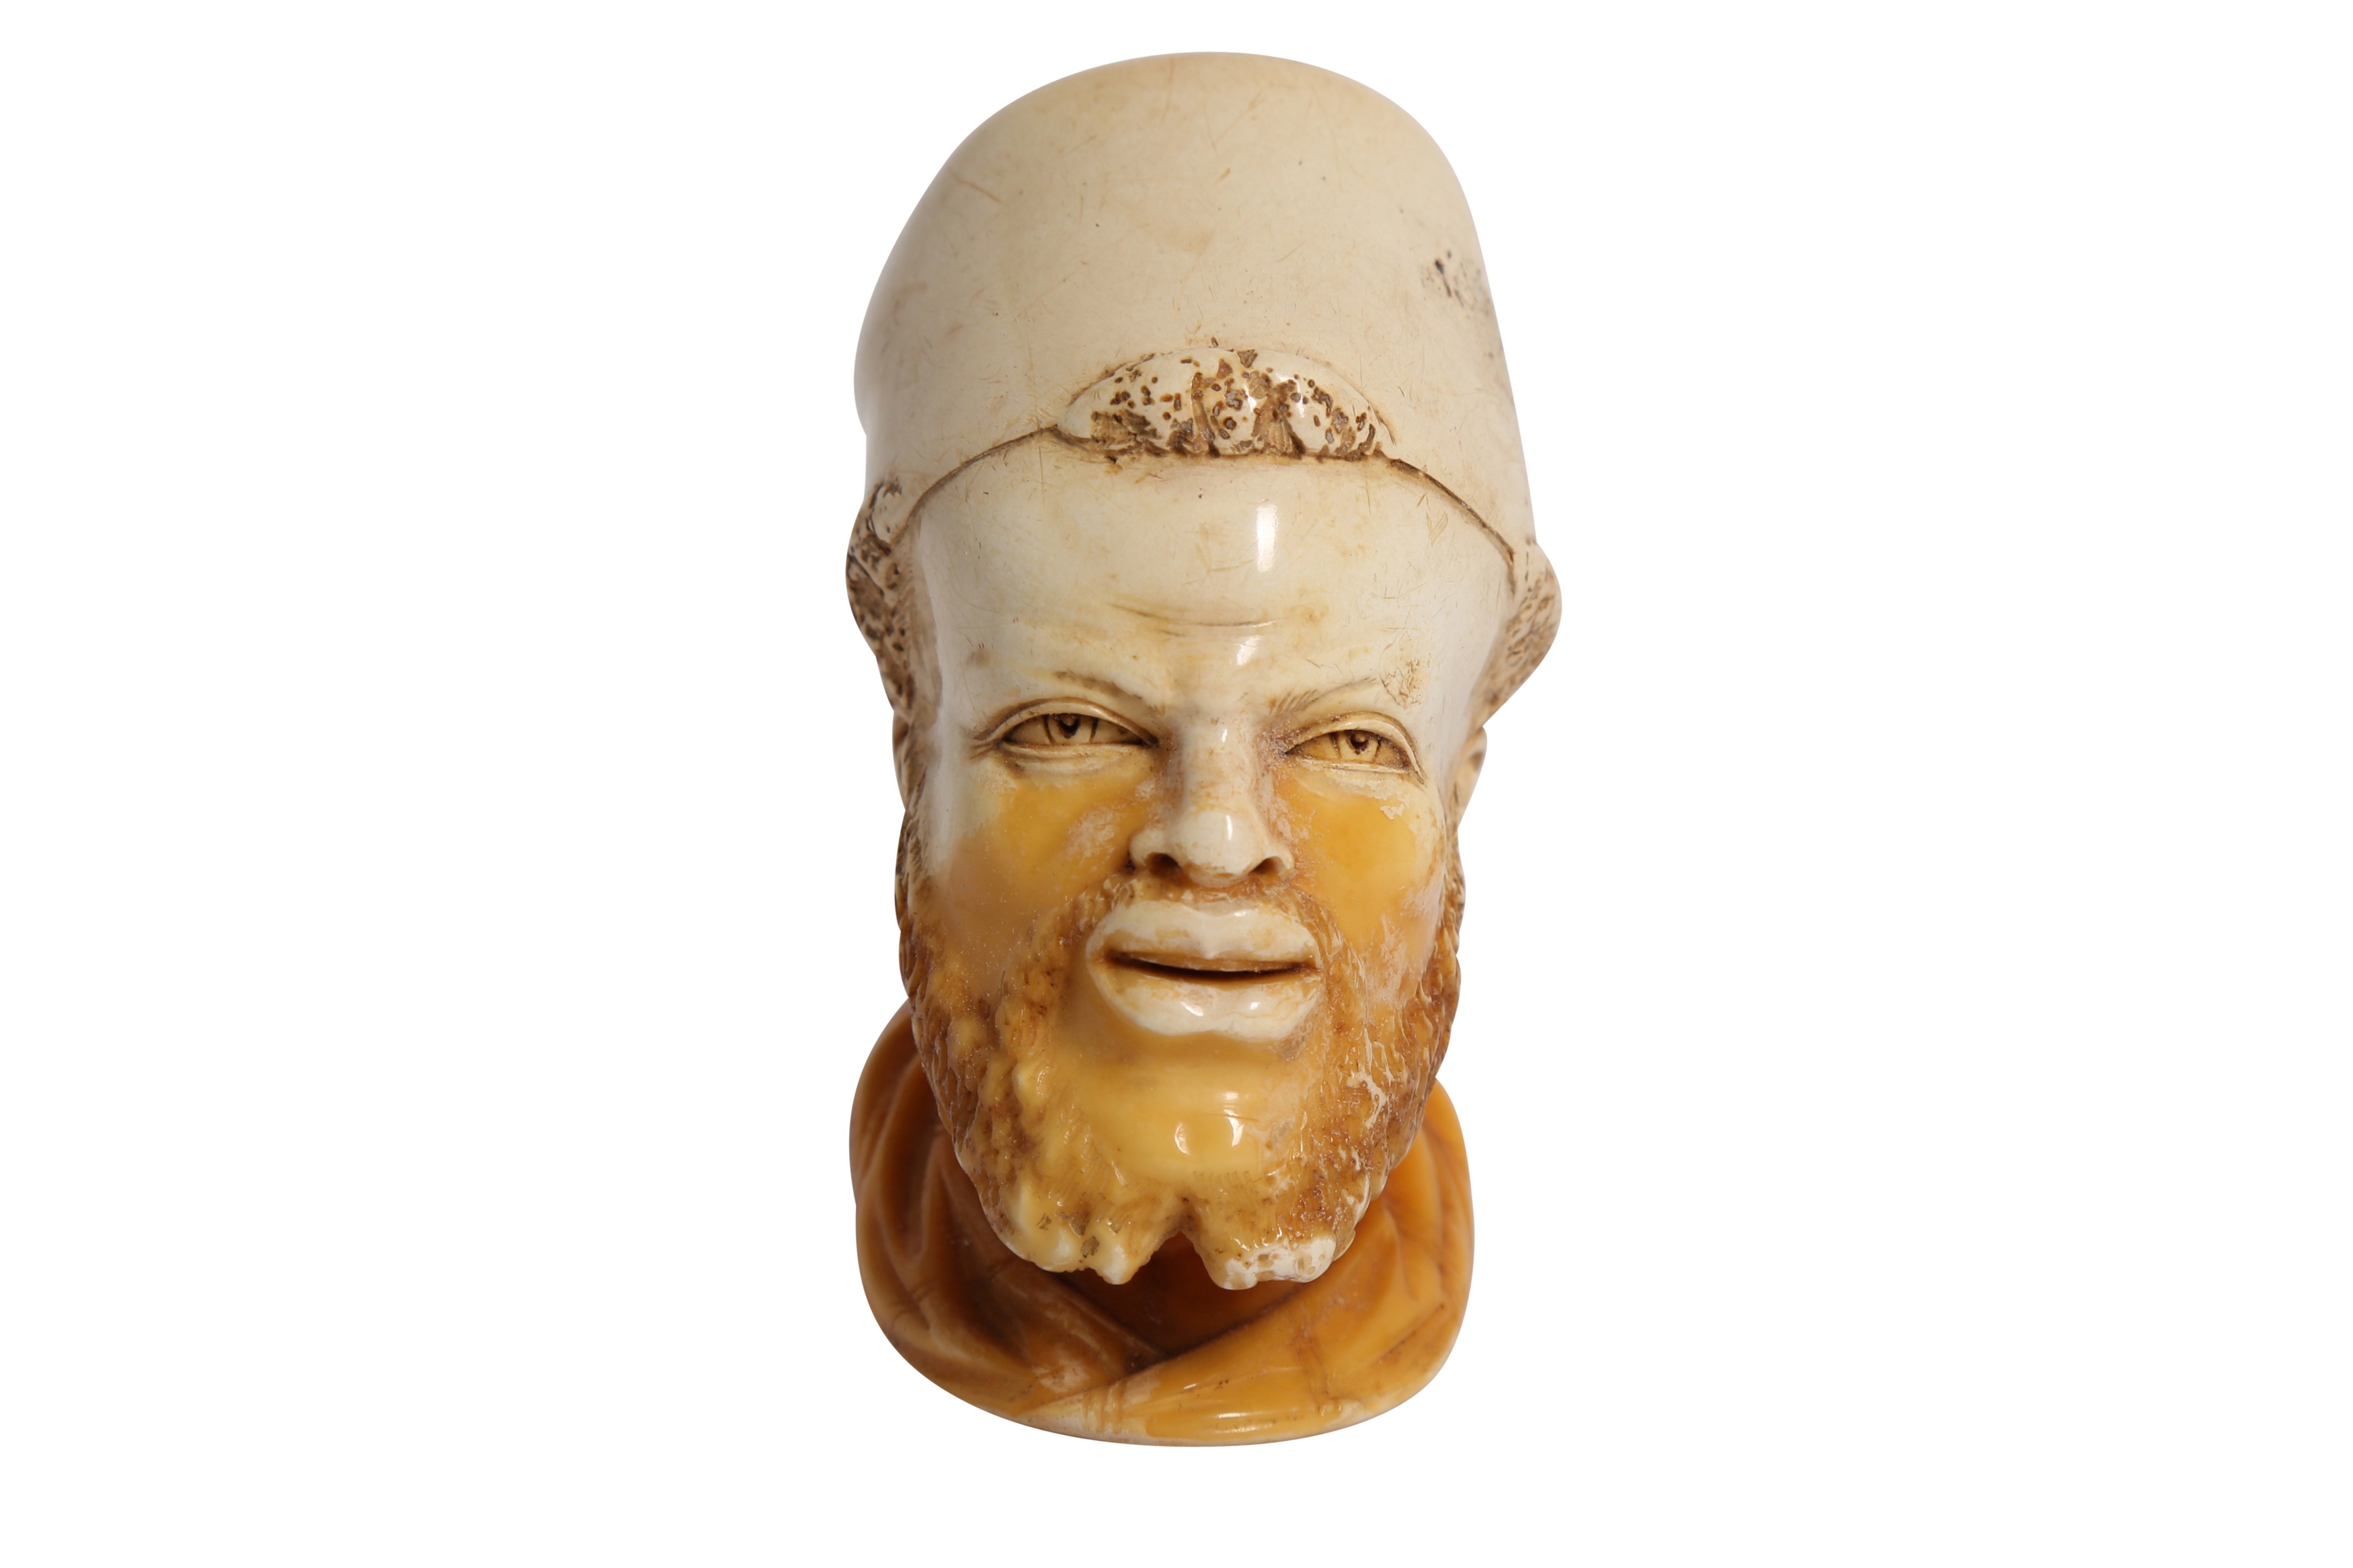 A CASED MEERSCHAUM PIPE WITH A TURKISH PASHA'S HEAD - Image 5 of 6